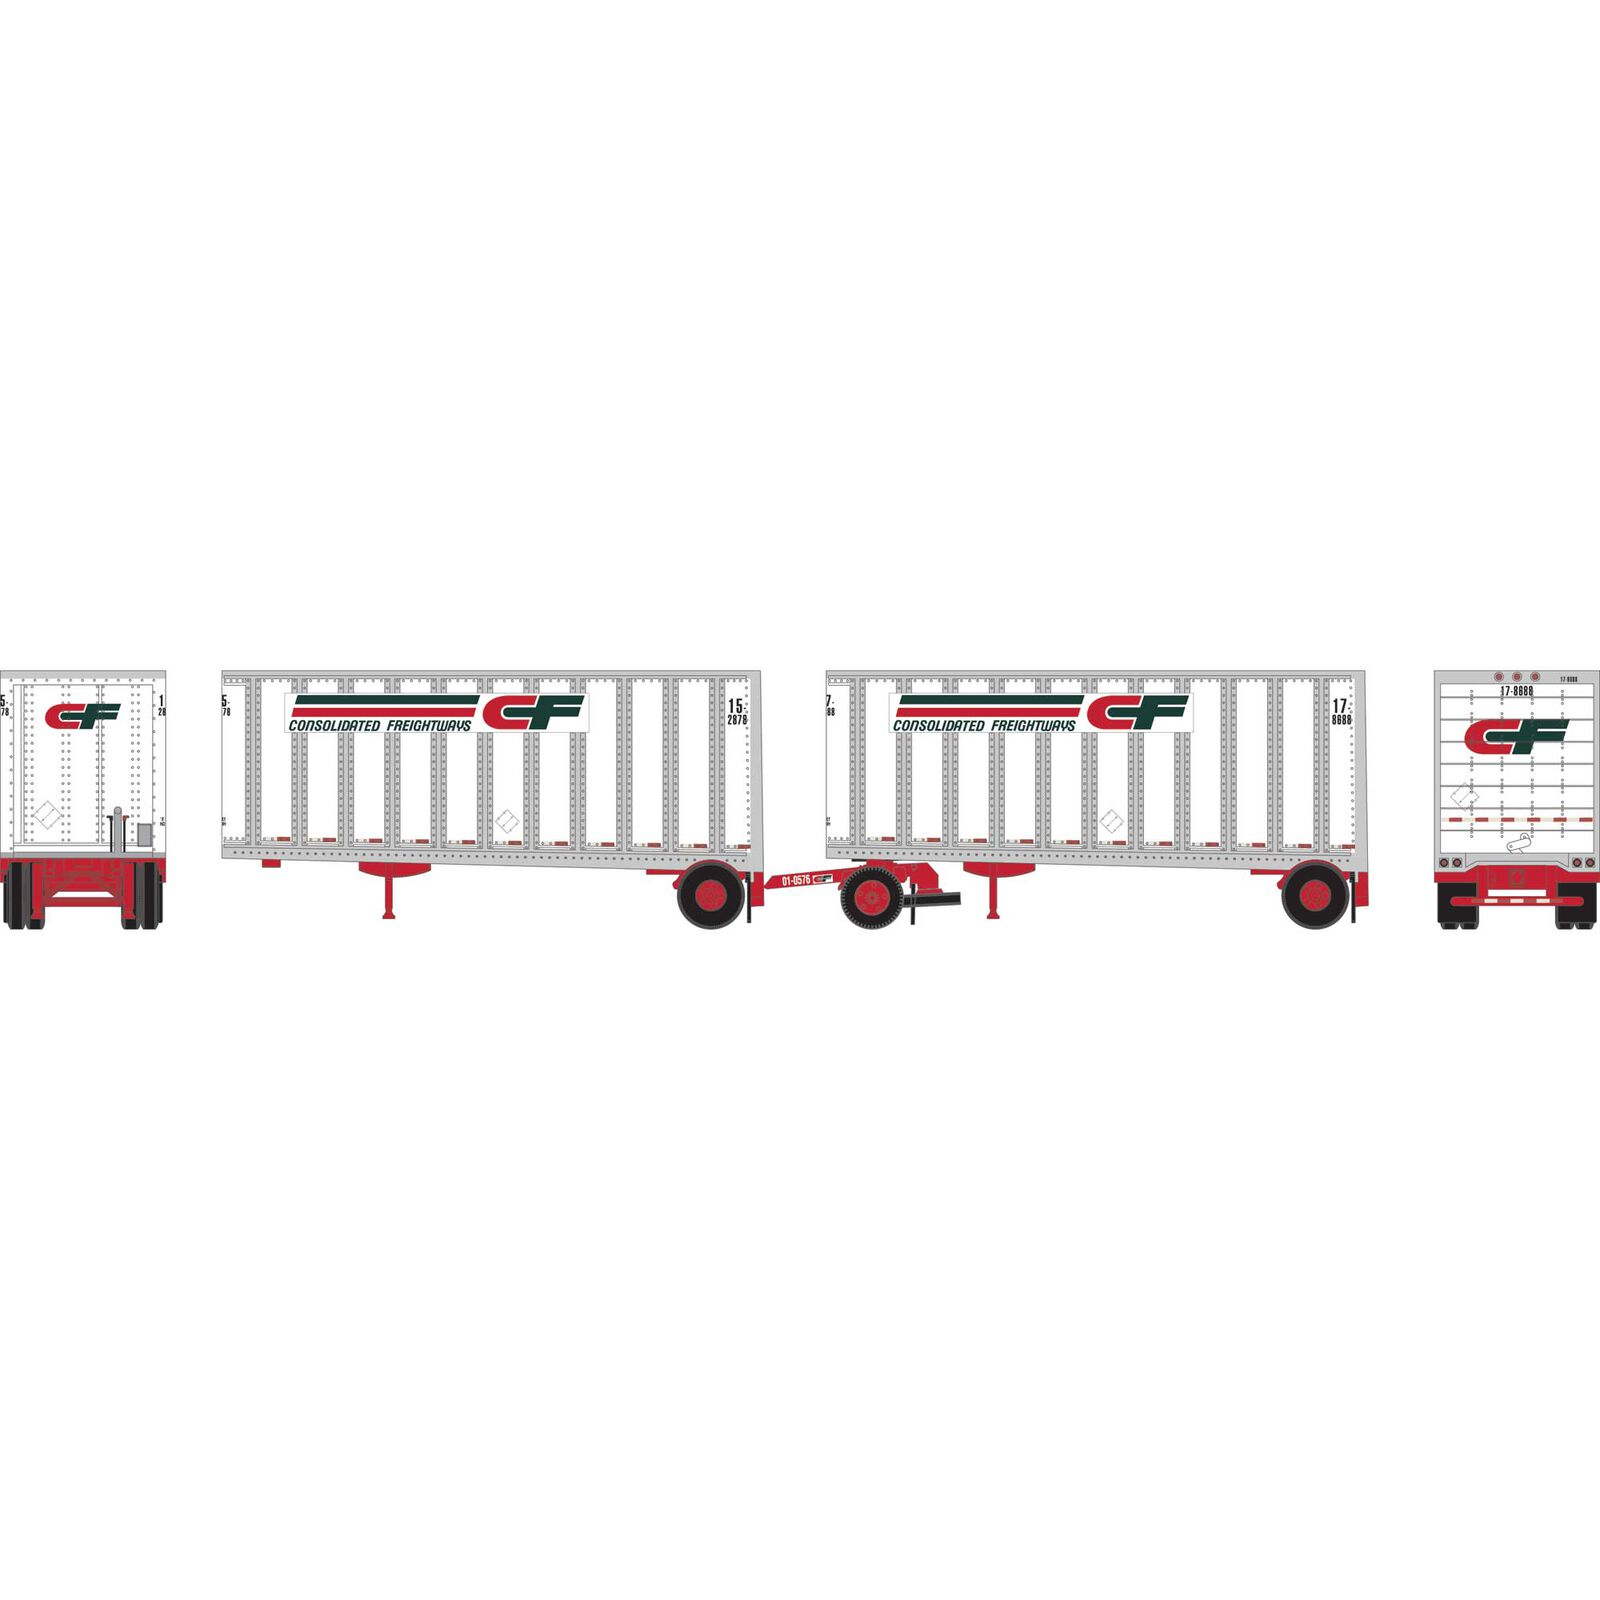 N ATH 28' Wedge Trailers Ext. Post (2) with Dolly, Consolidated Freight- Trailers: 15-2878/17-8688; Dolly: 01-0576